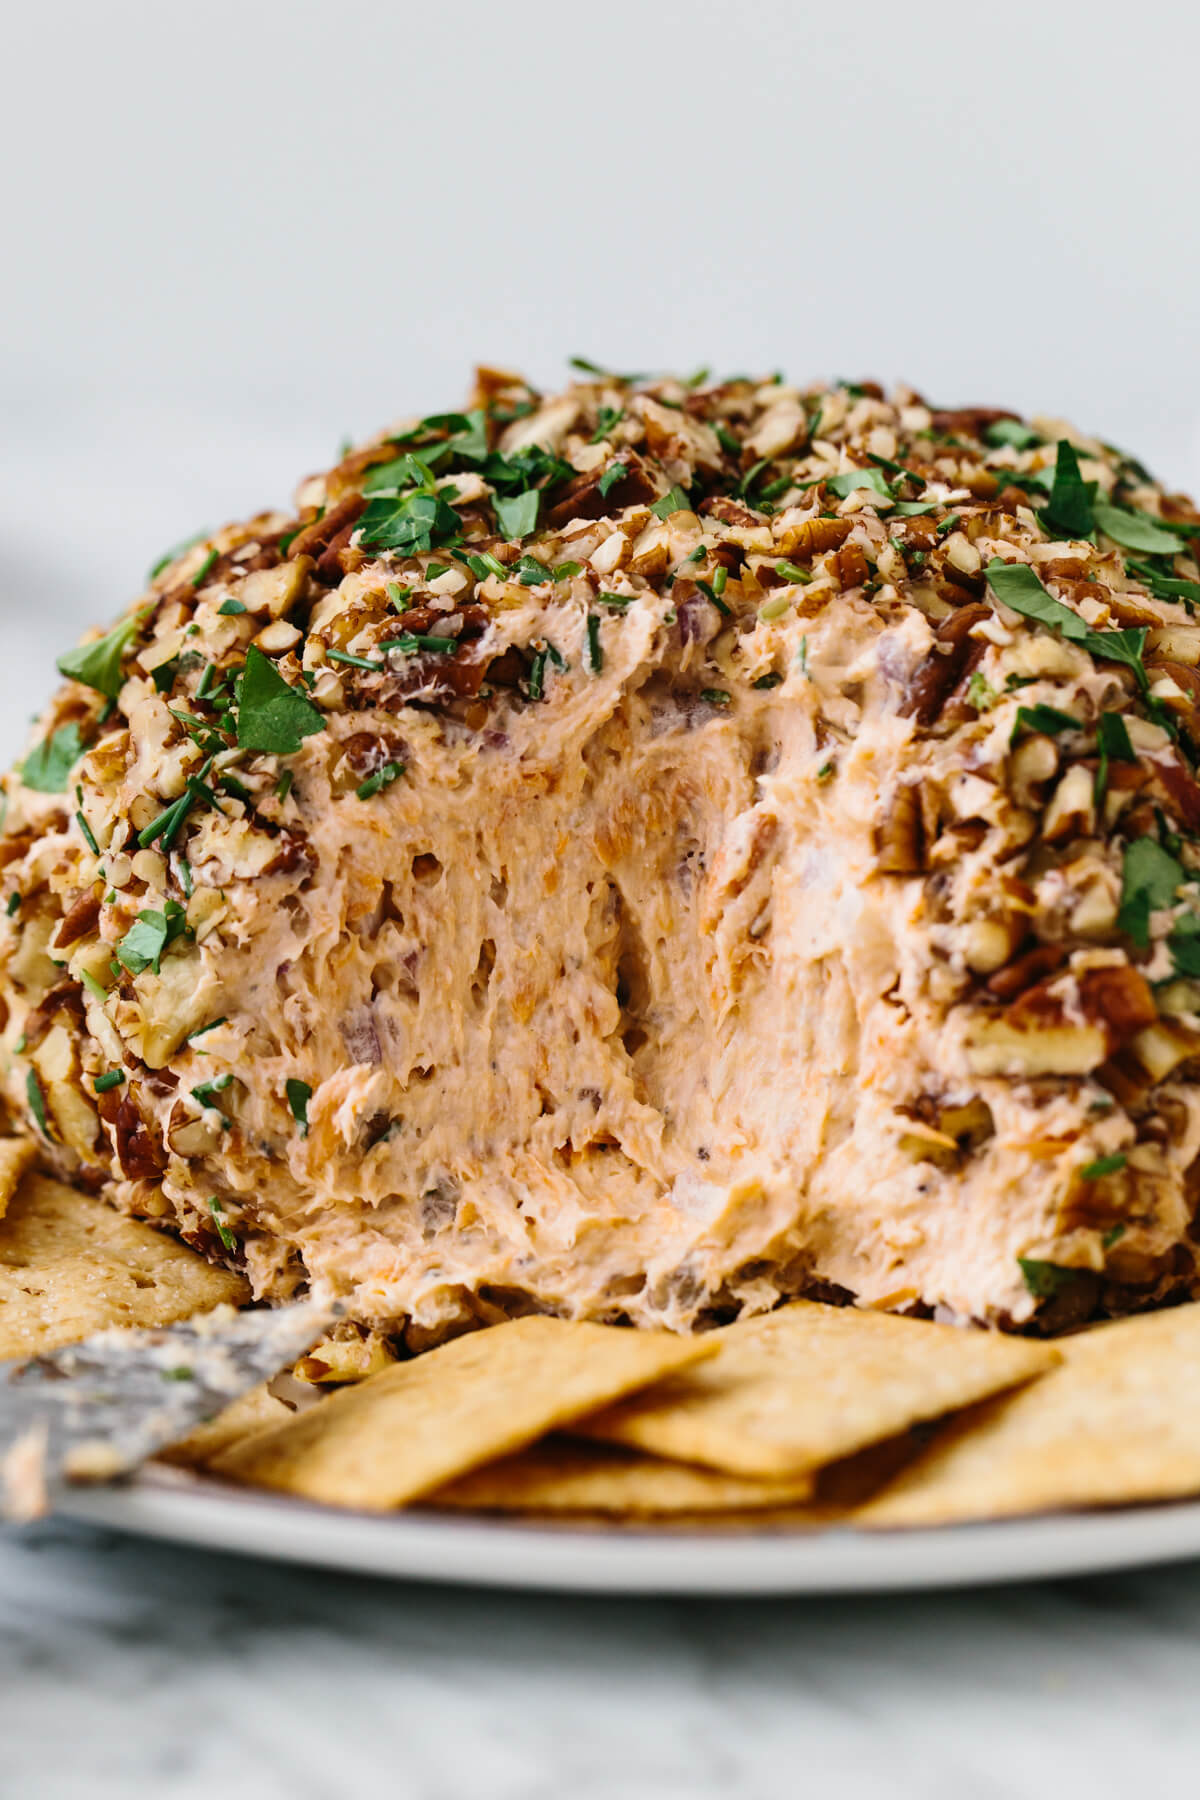 Smoked salmon cheese ball with crackers.